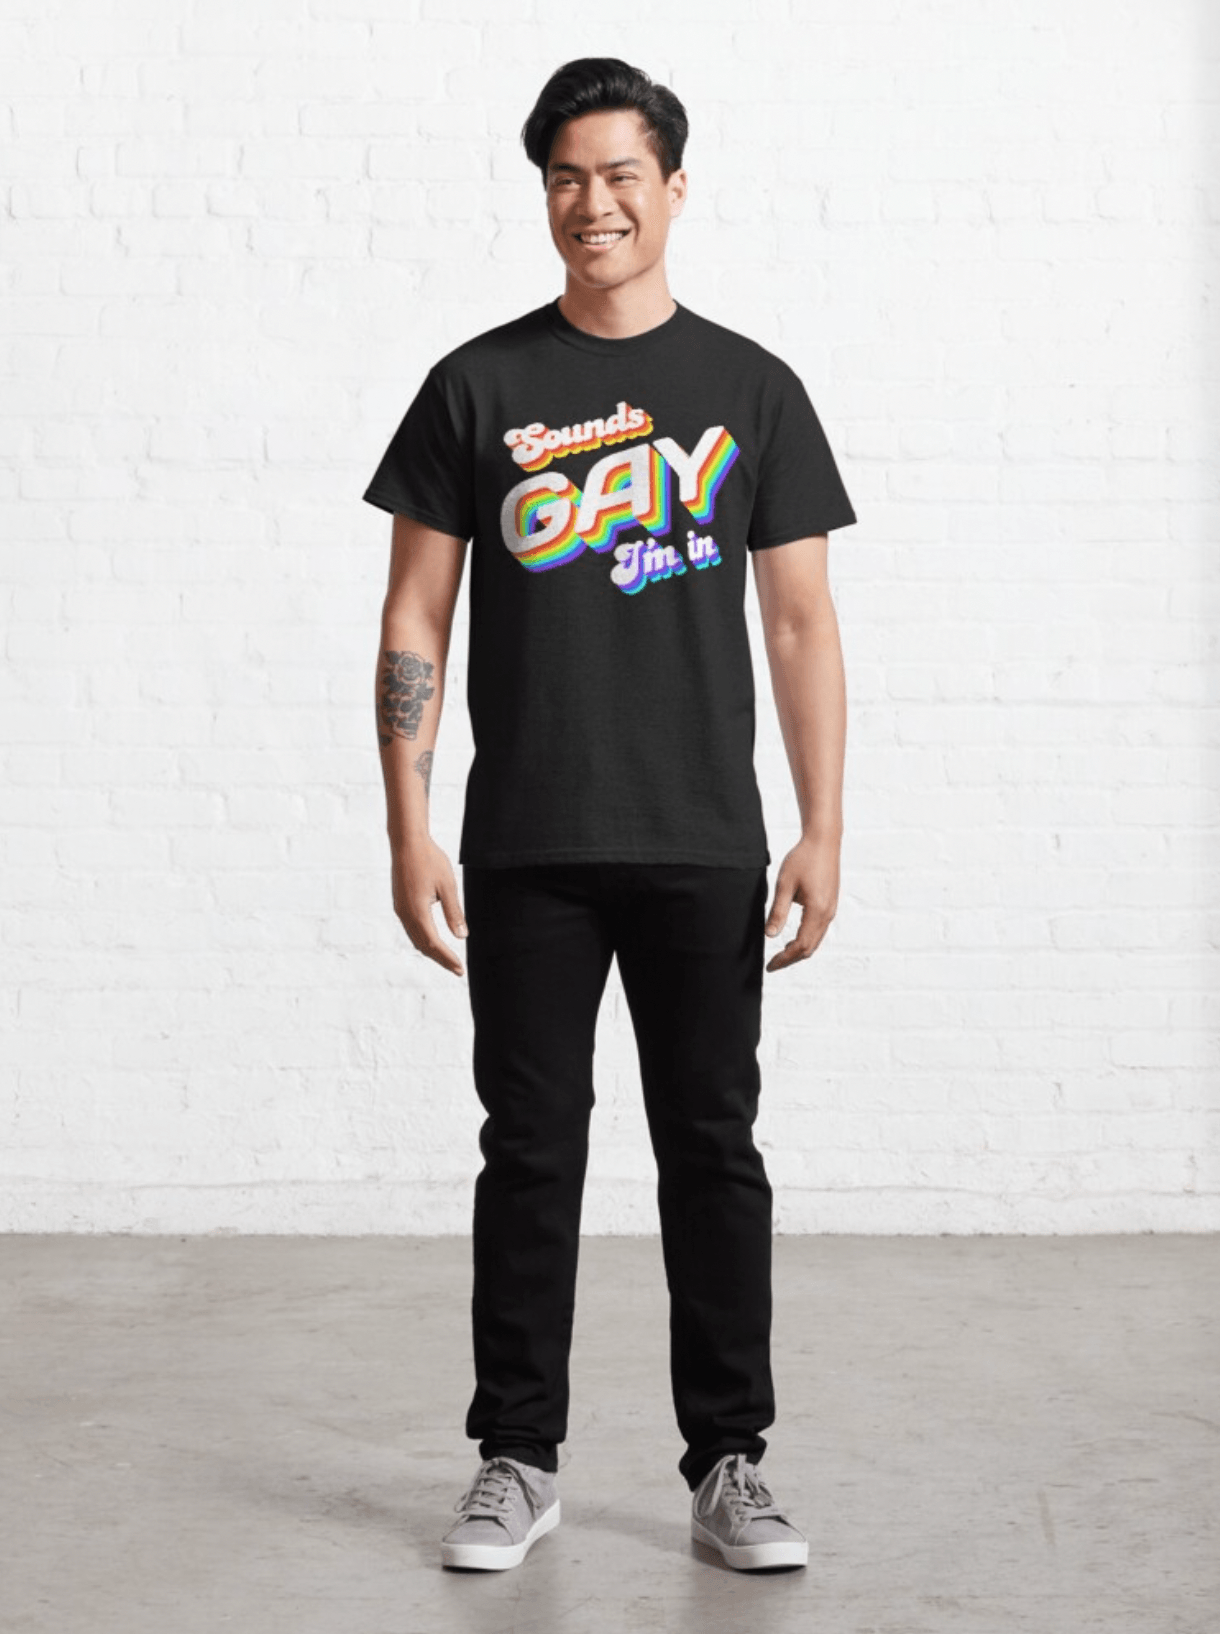 'Sounds Gay I'm In' Uni-Sex Shirt - Gays+ Store